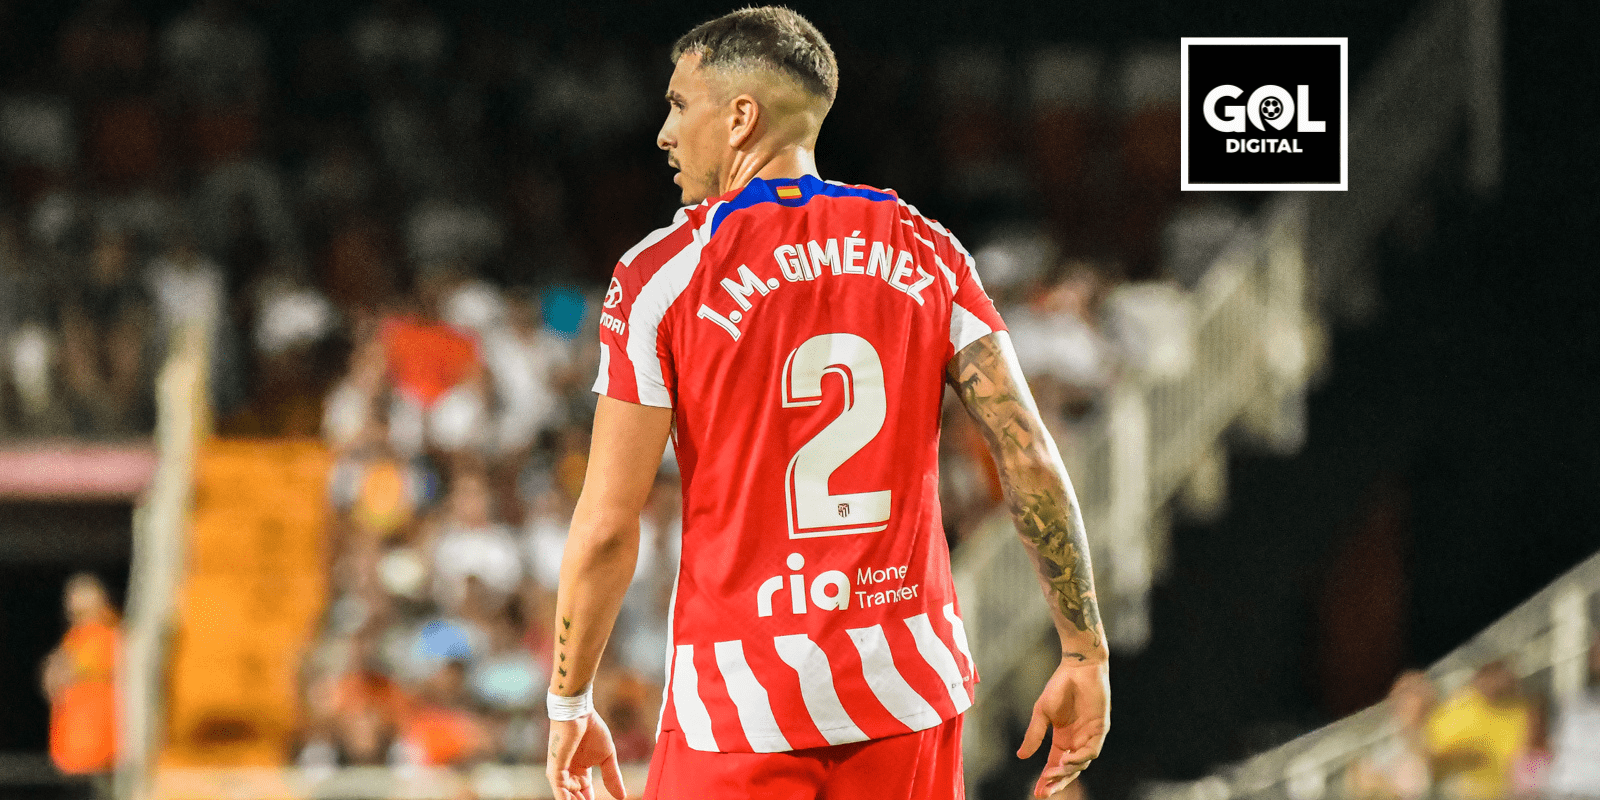 The signing that Simeone implores after losing patience with Giménez
